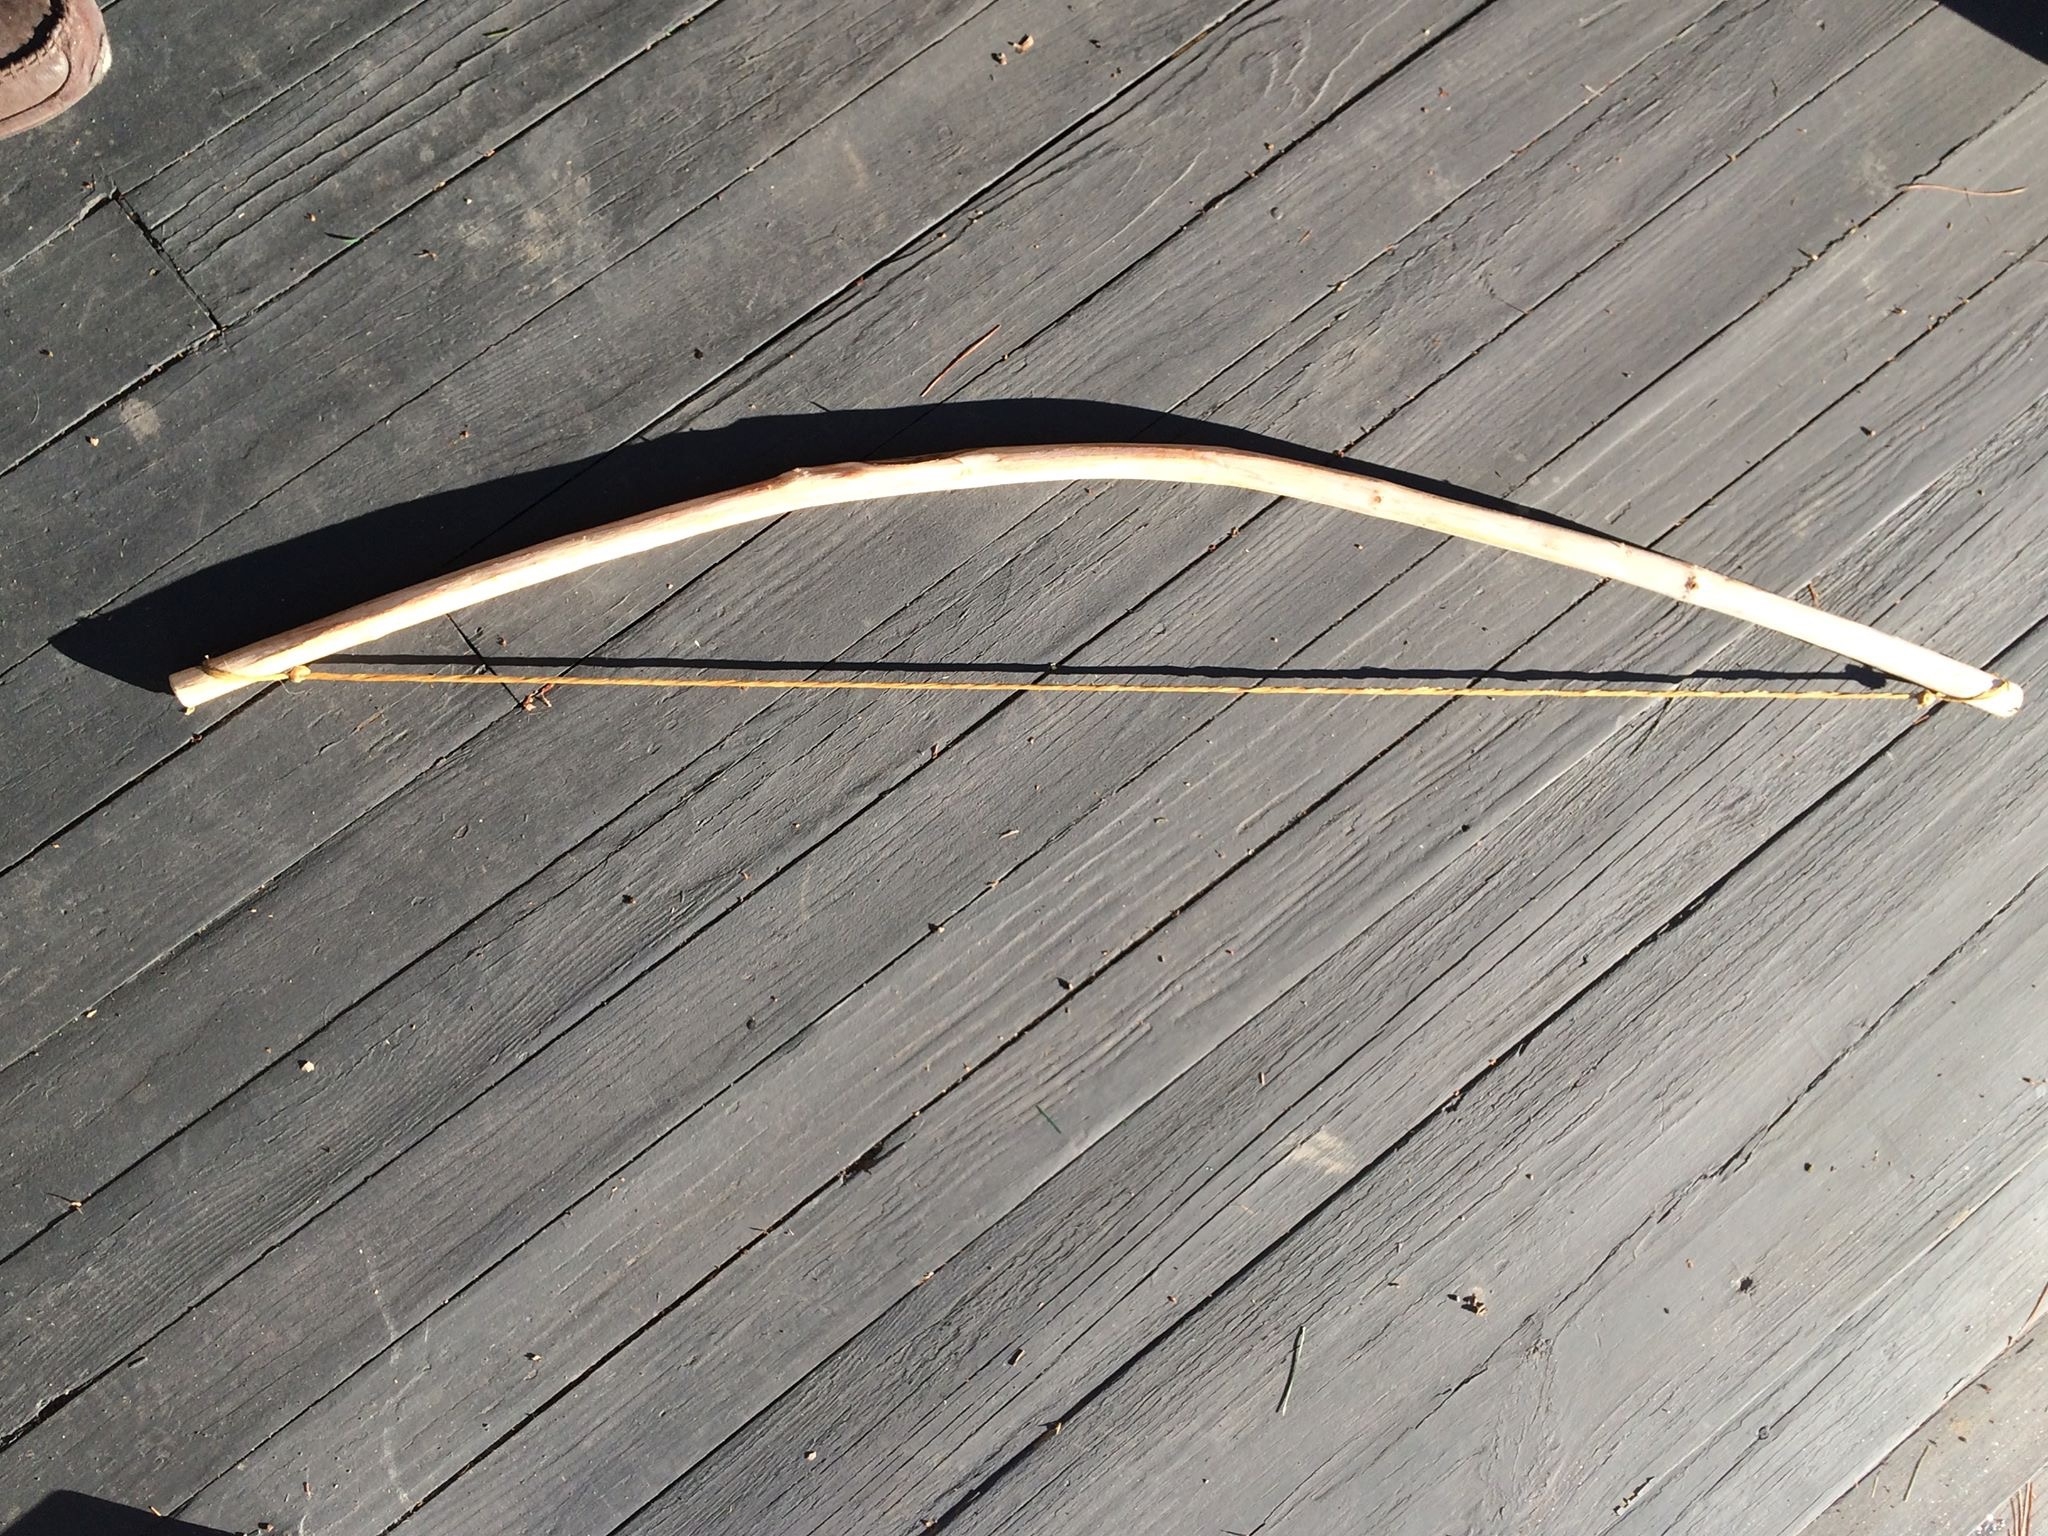 A small bow made from a sapling limb.